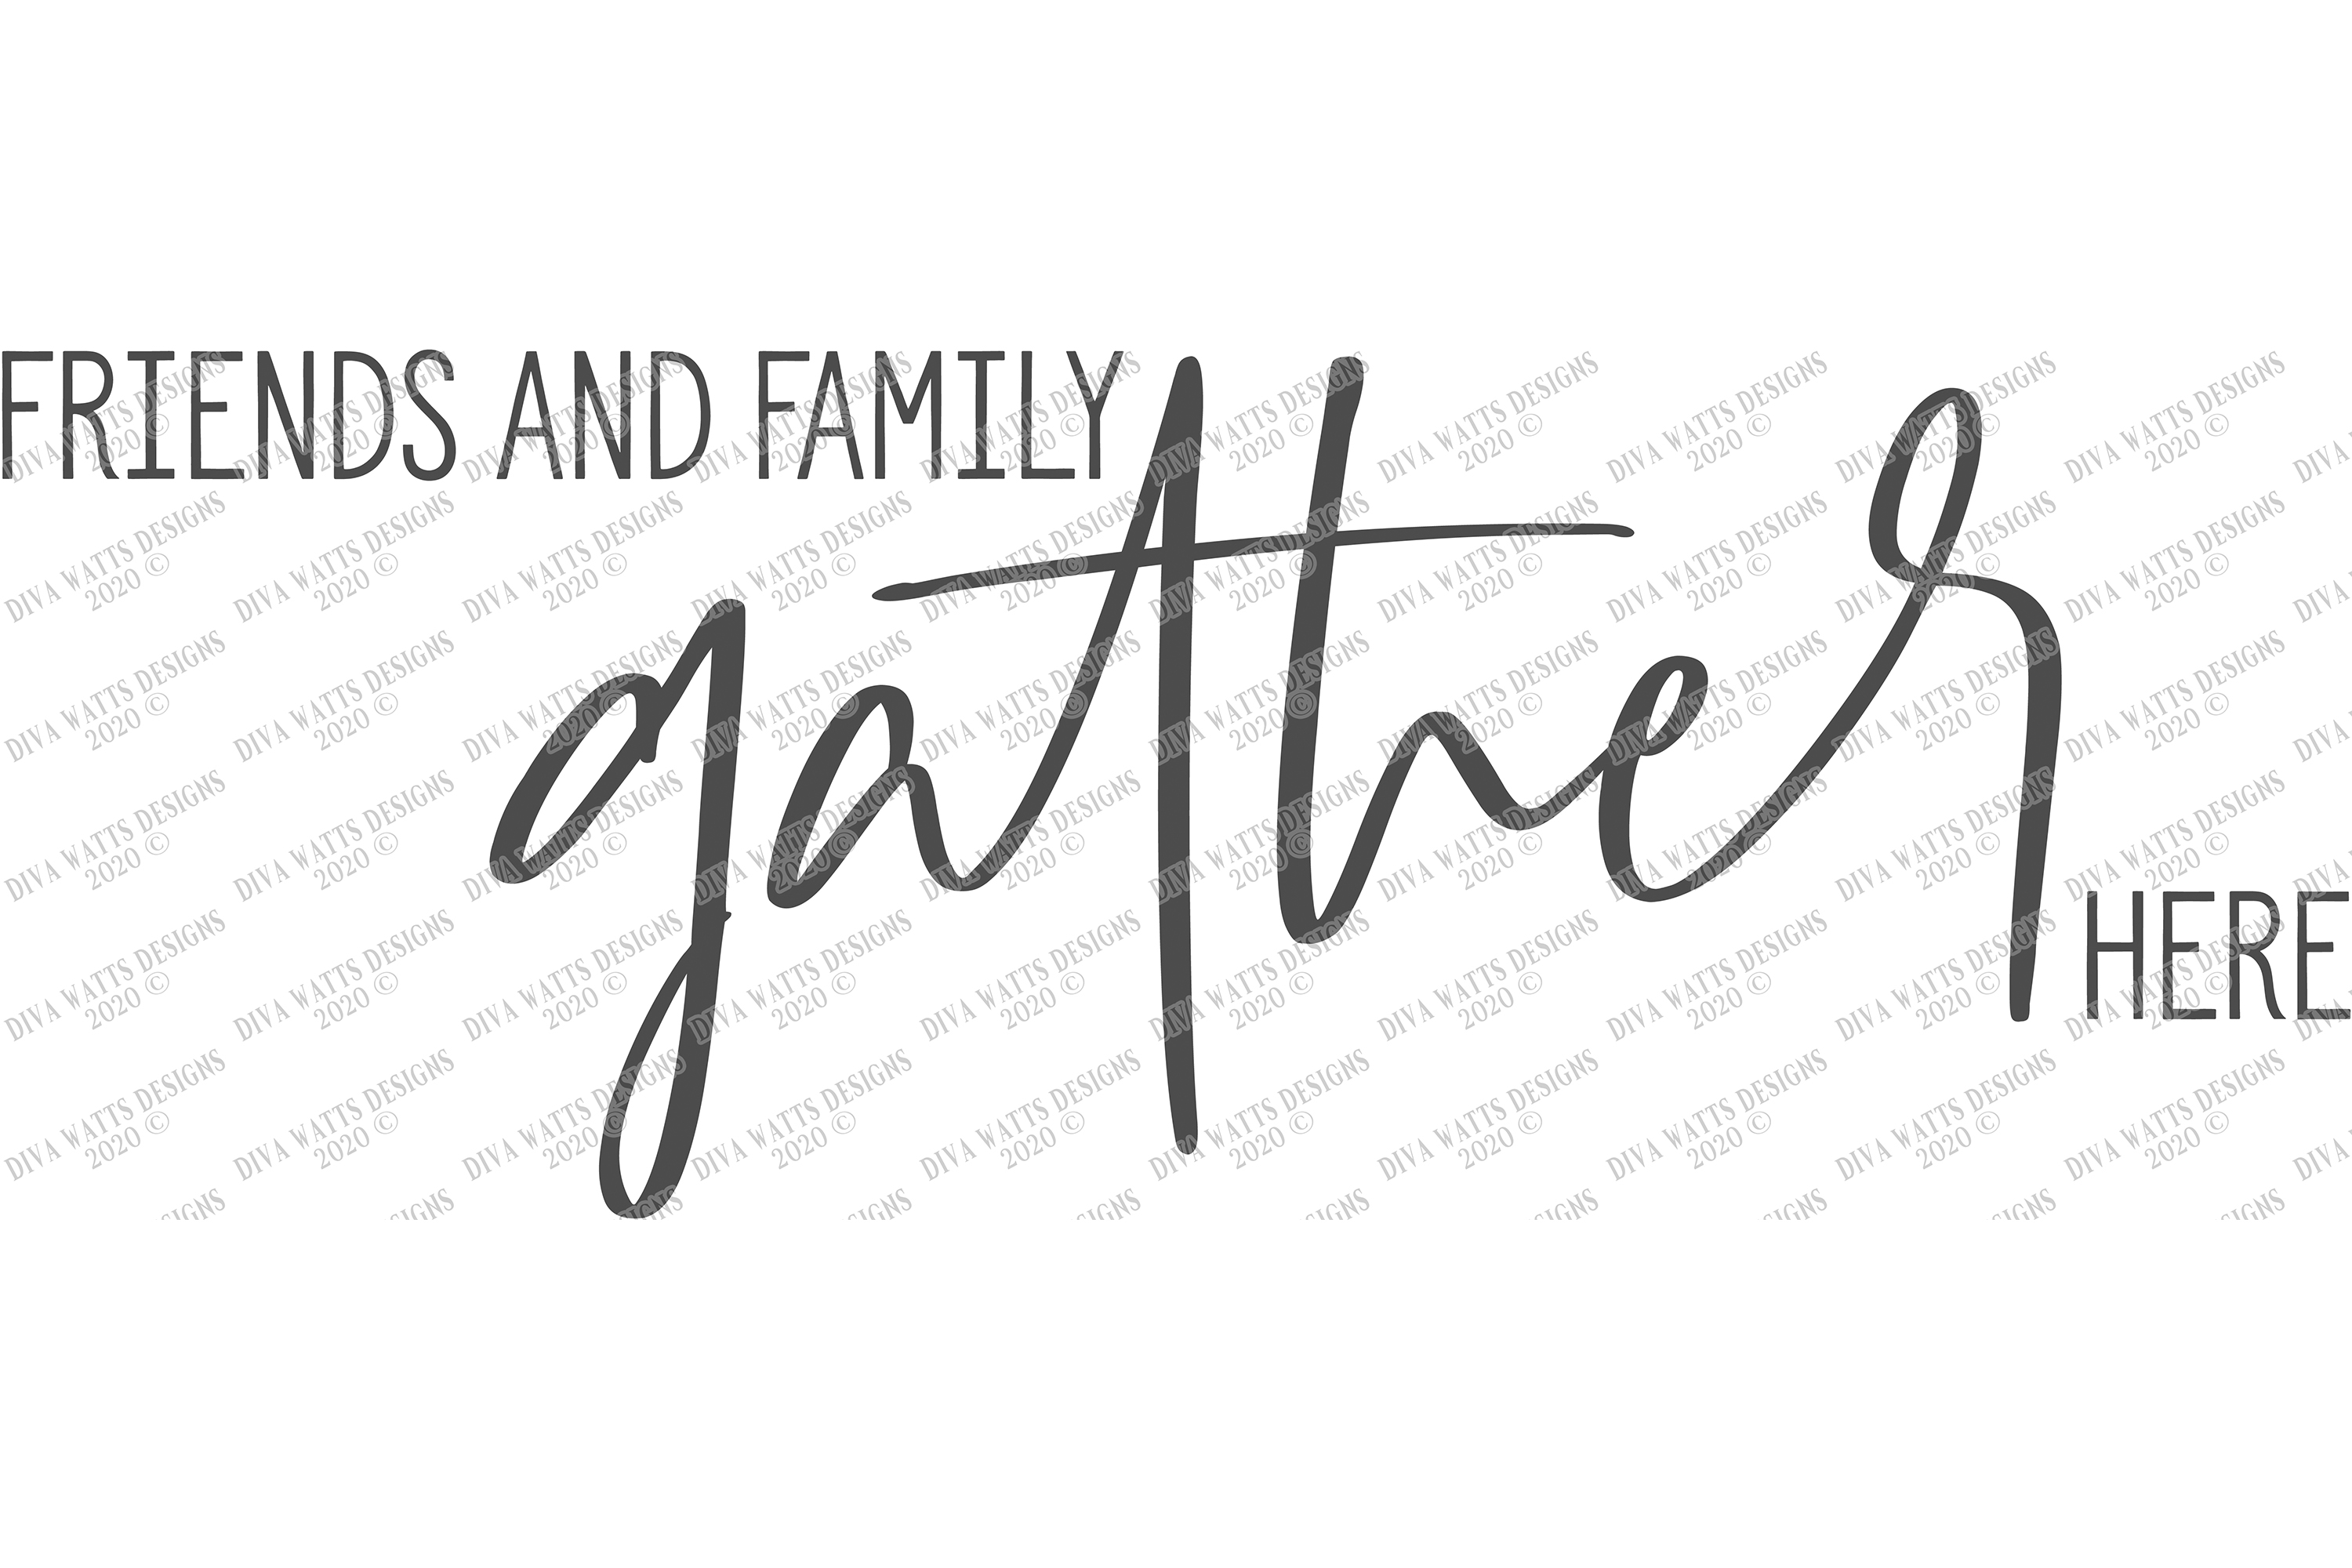 Download Friends and Family Gather Here - Cutting File - SVG EPS PNG